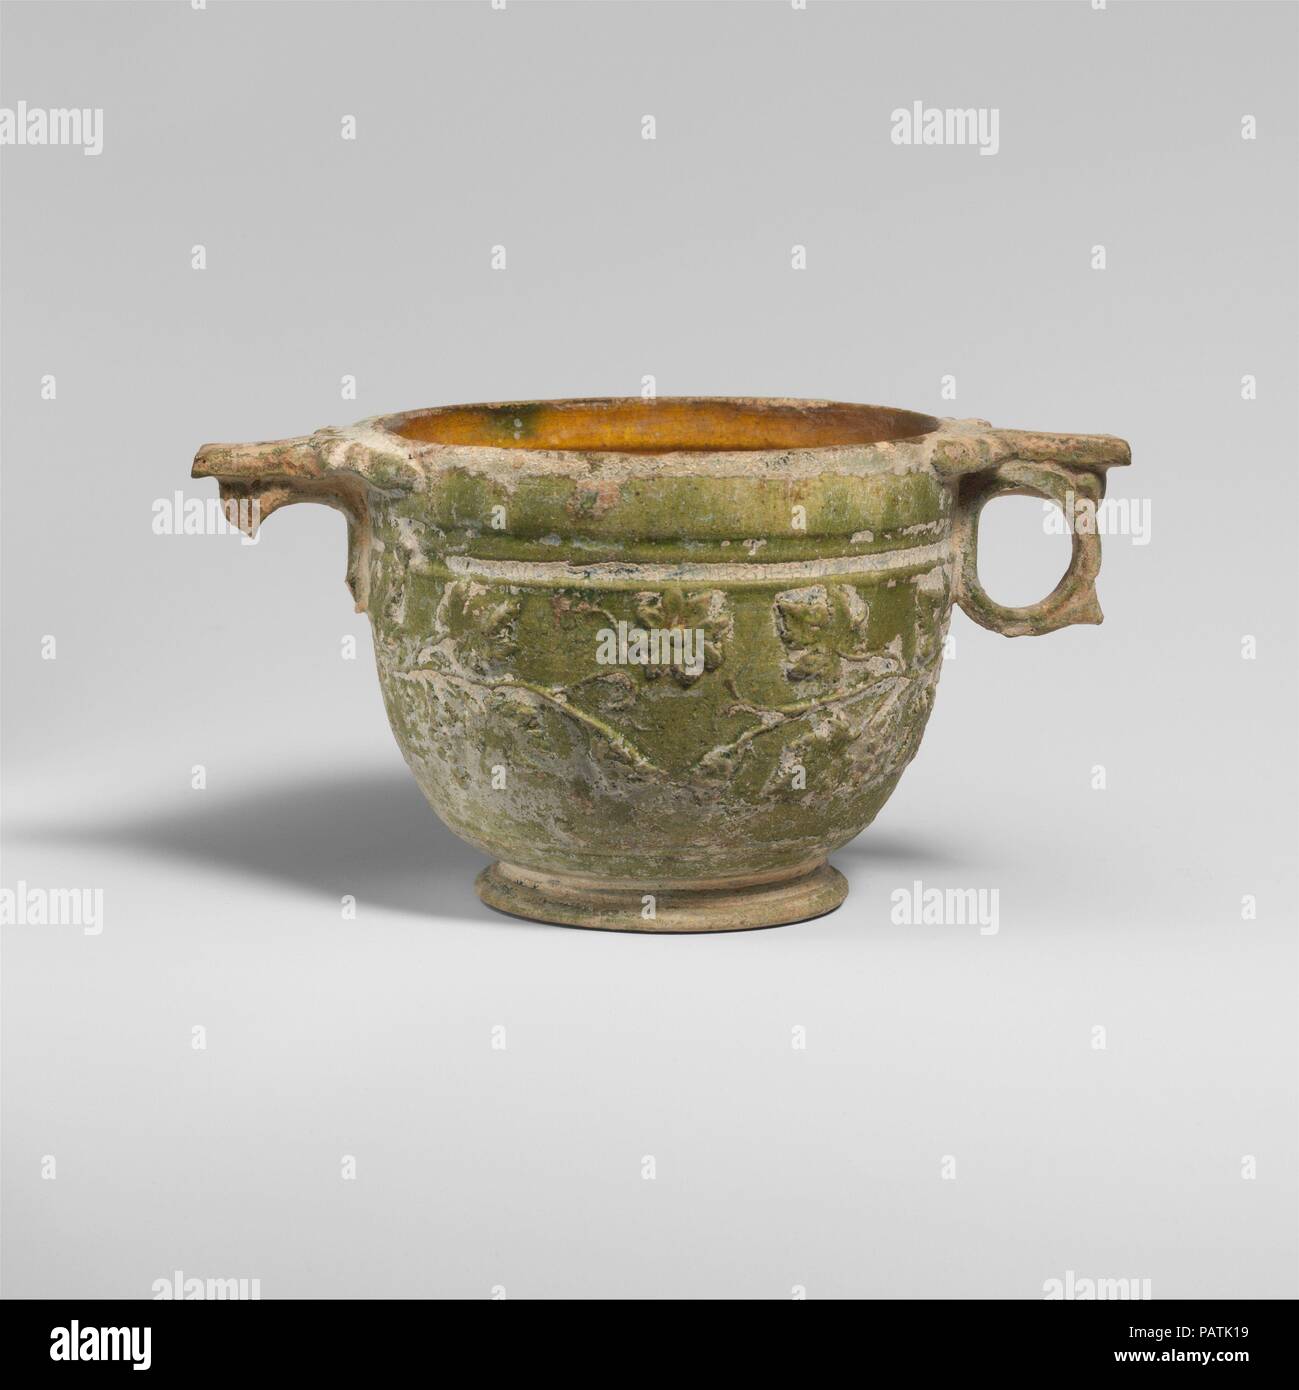 Terracotta scyphus (drinking cup). Culture: Roman. Dimensions: H. 2 15/16 in. (7.49 cm). Date: 1st half of 1st century A.D..  Green-glazed cup with floral sprays in relief. Museum: Metropolitan Museum of Art, New York, USA. Stock Photo